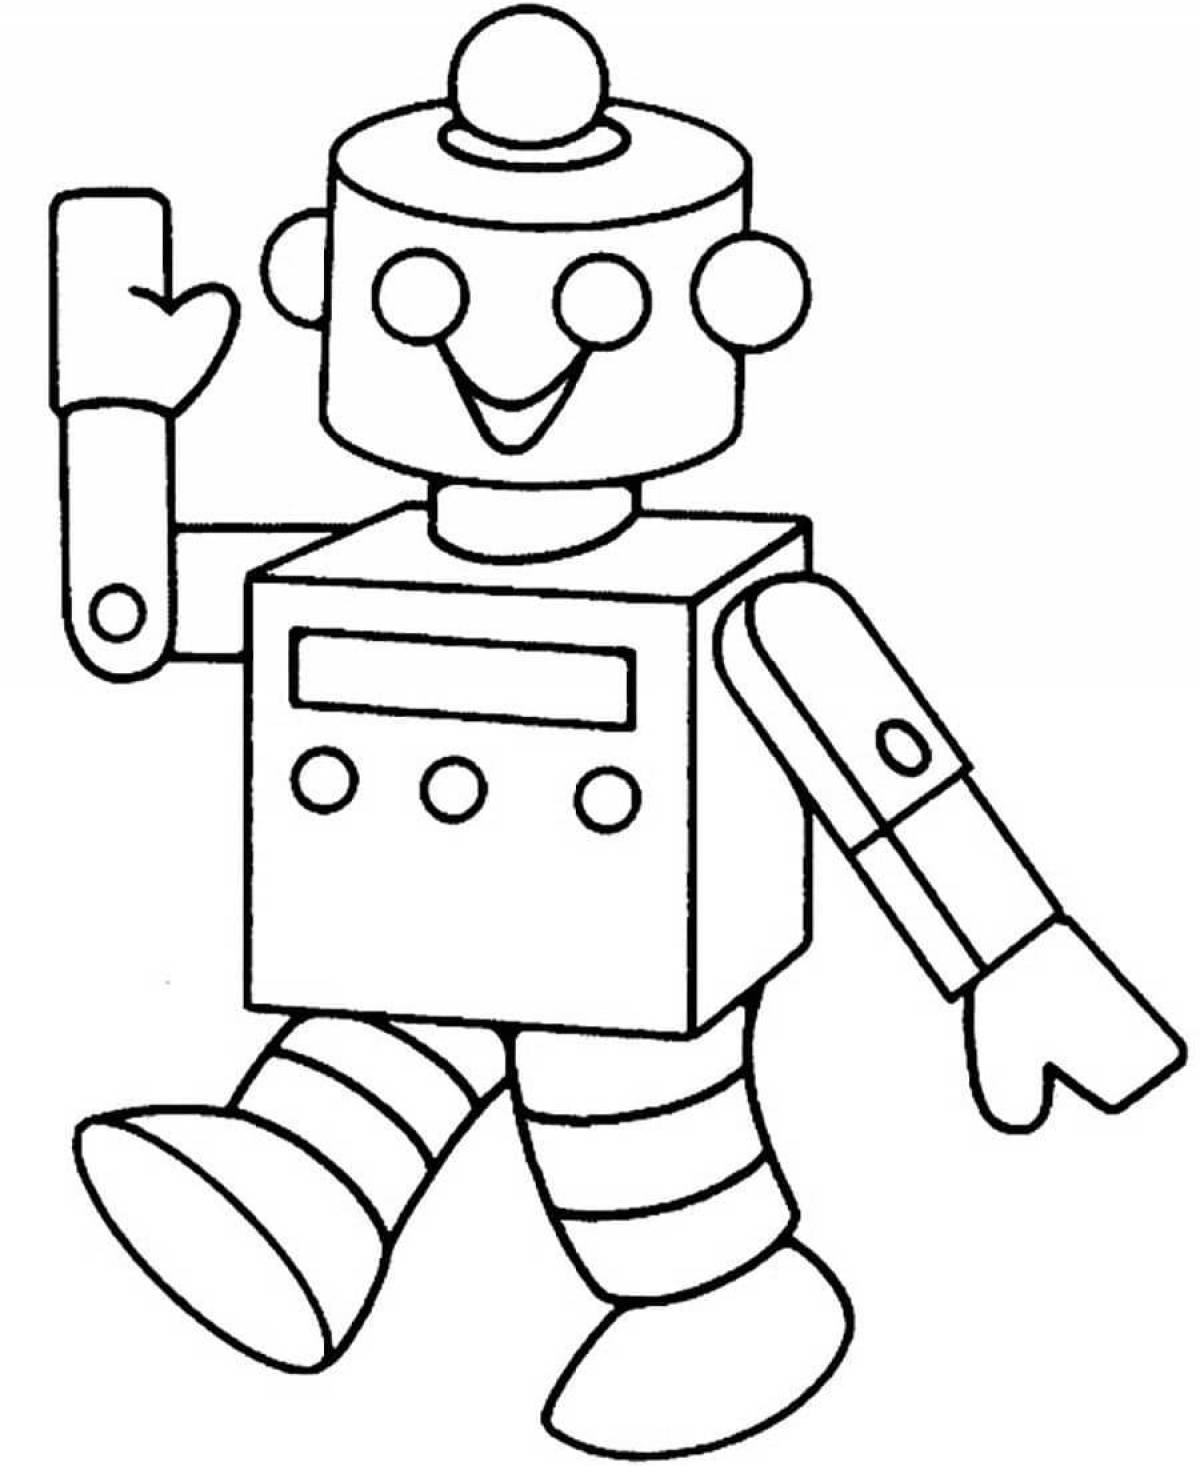 Colorful robot coloring book